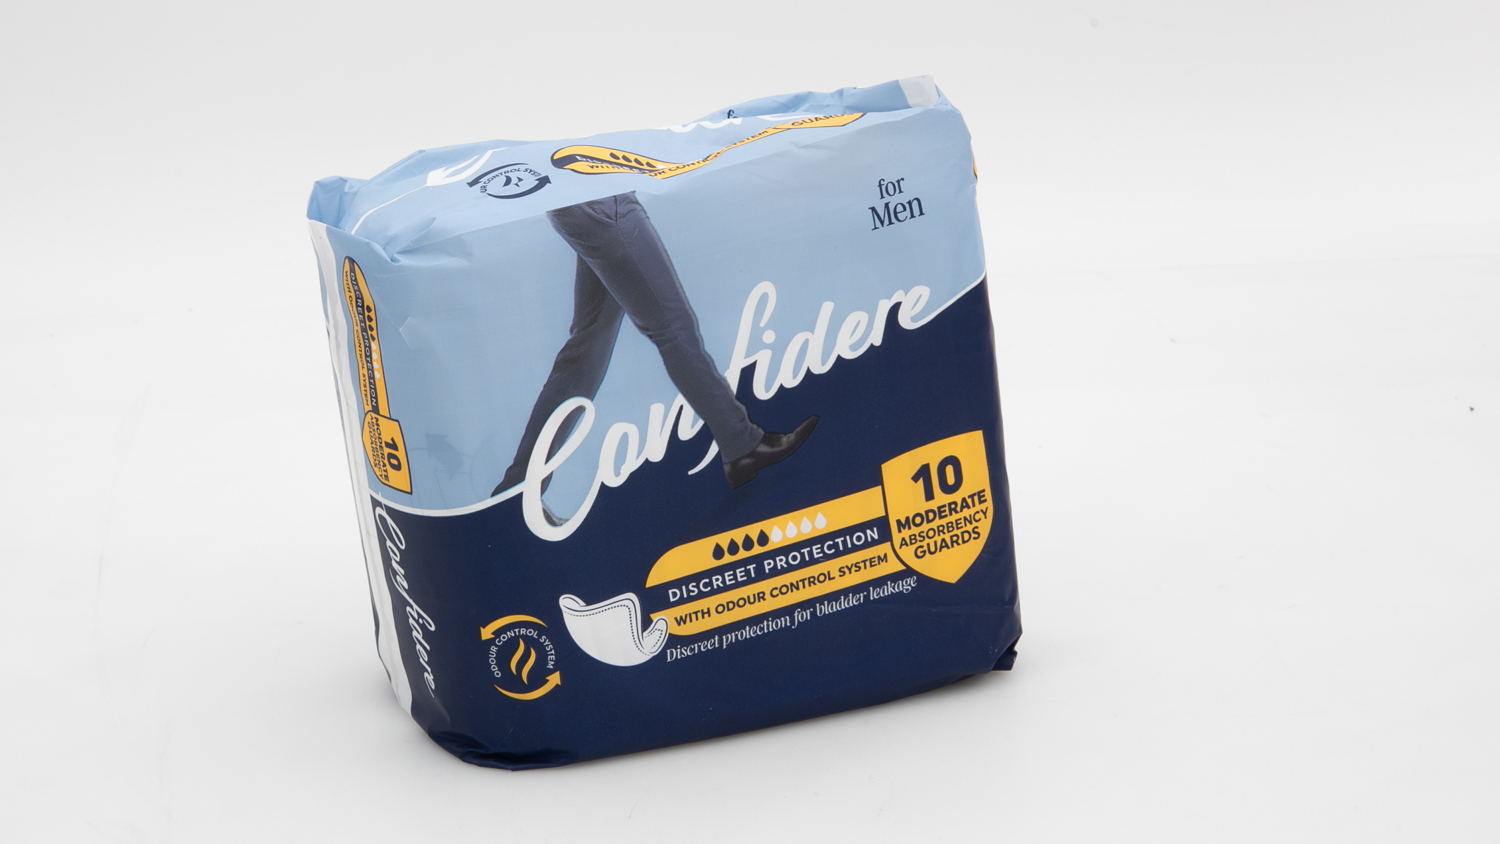 Woolworths Confidere for Men Moderate Absorbency Guards carousel image